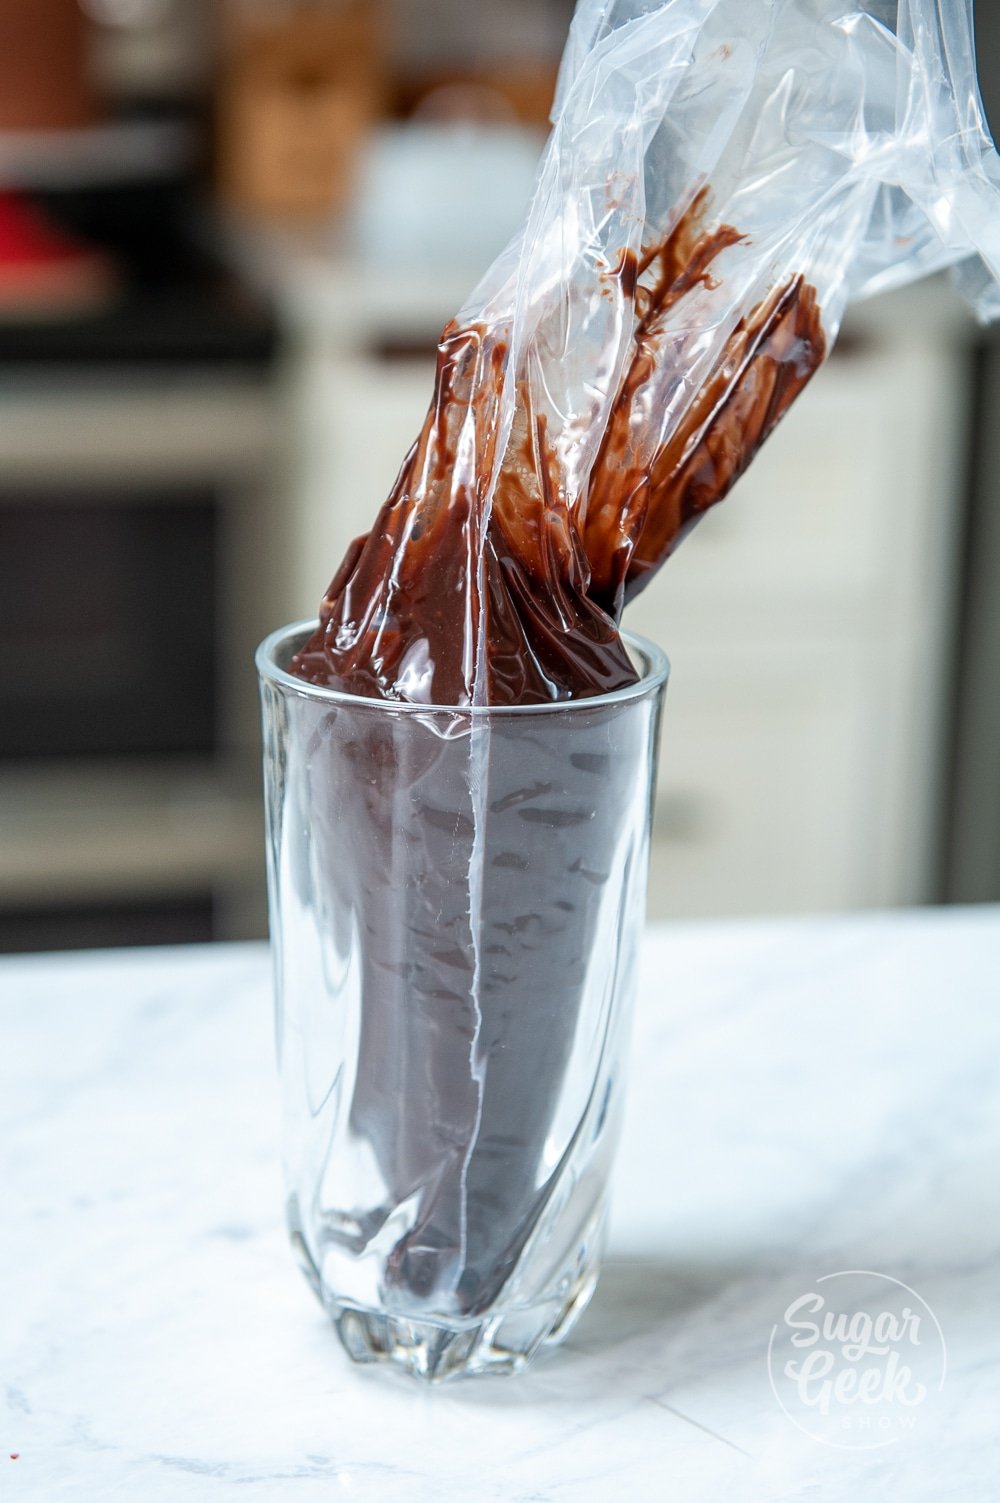 piping bag with chocolate ganache inside a glass cup